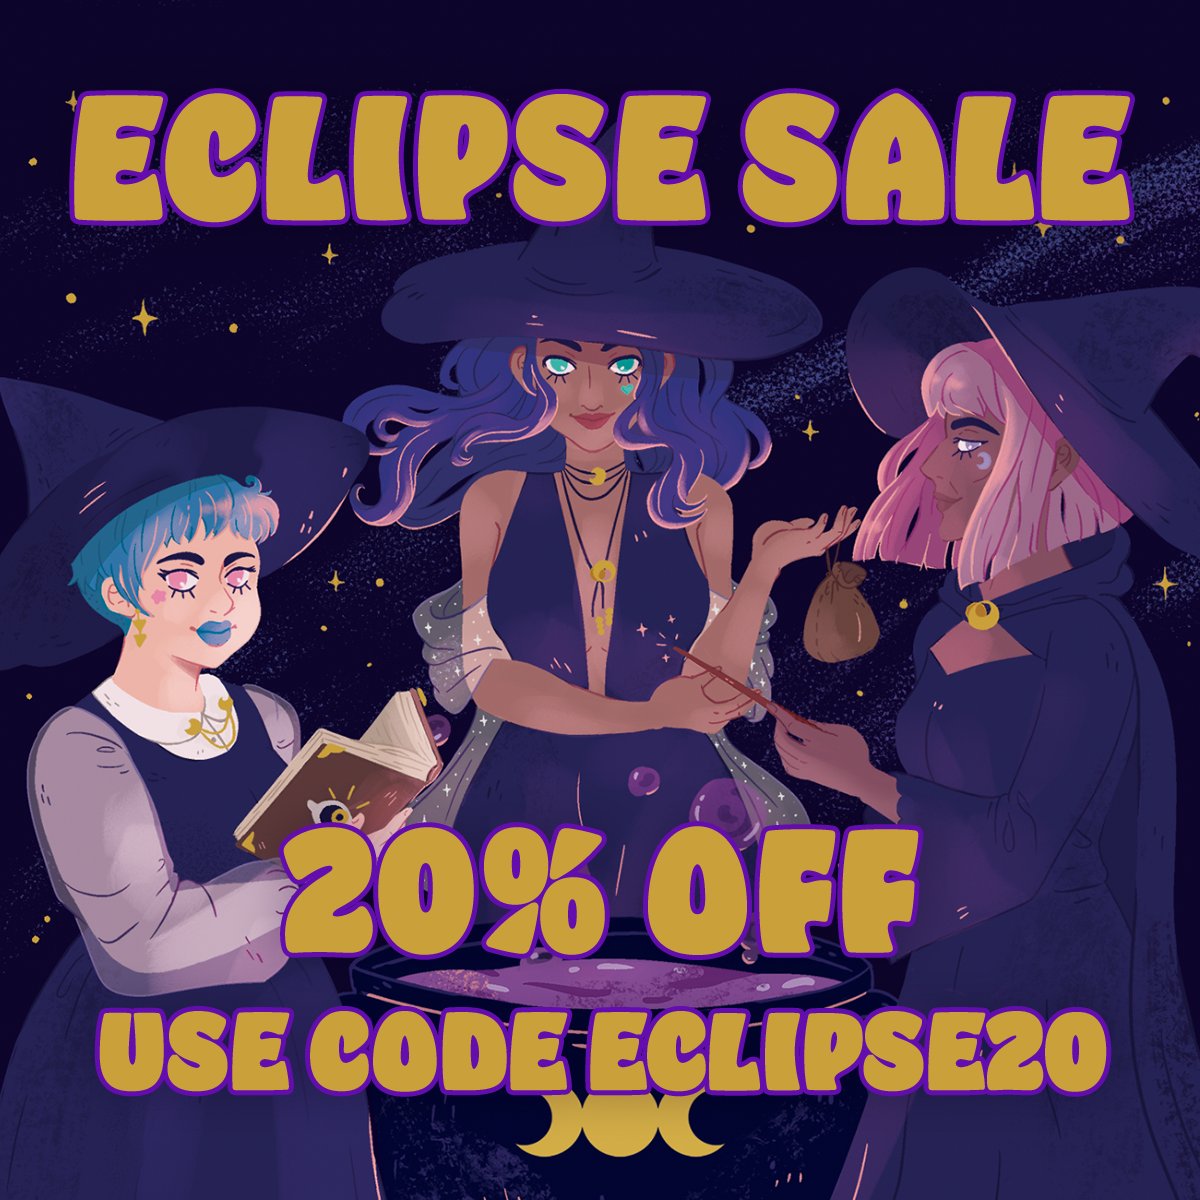 Brace yourself for cosmic events, like this upcoming solar eclipse, with our pocket comic spellbook! From now until 4/15, grab 20% off both physical and digital versions of Eternal Witchcraft with code ECLIPSE20!  ☀️🌑🌎✨ Store link in thread!